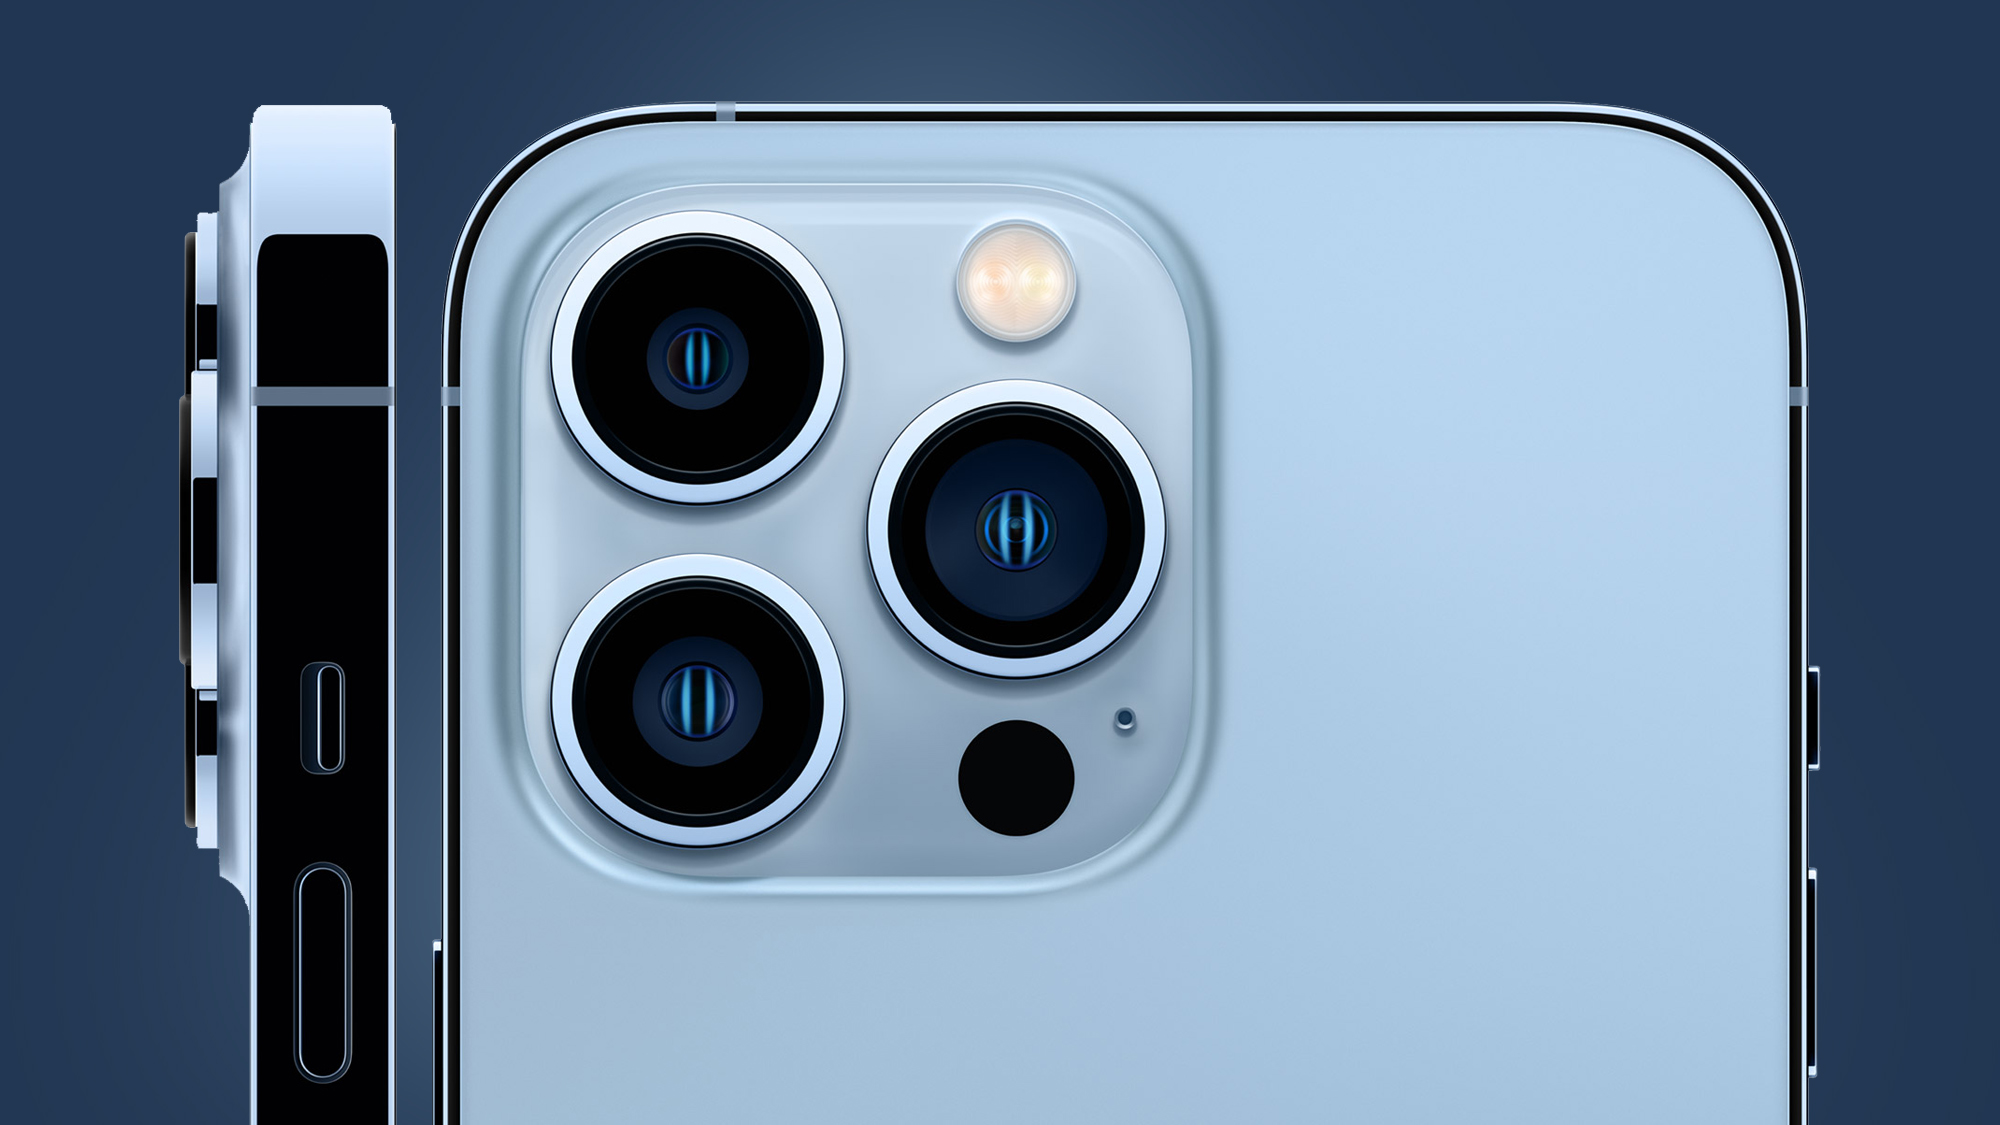 The iPhone 13 Pro's camera module on a blue background